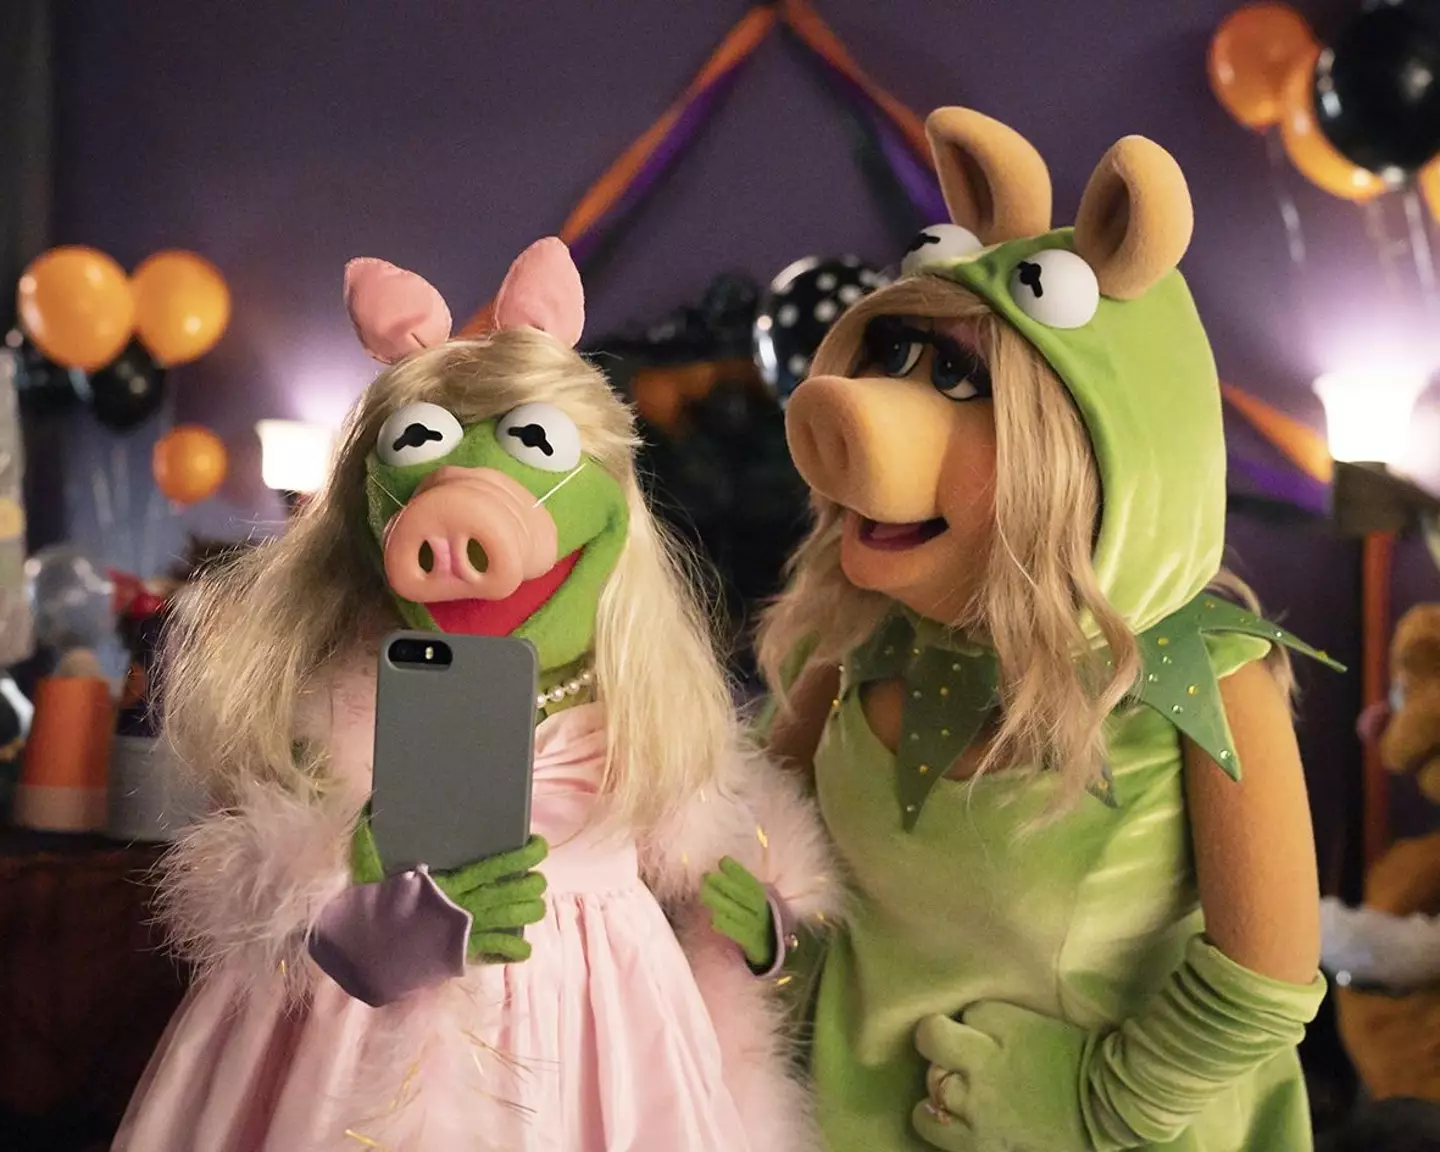 Kermit and Miss Piggy dress as each other for Halloween (